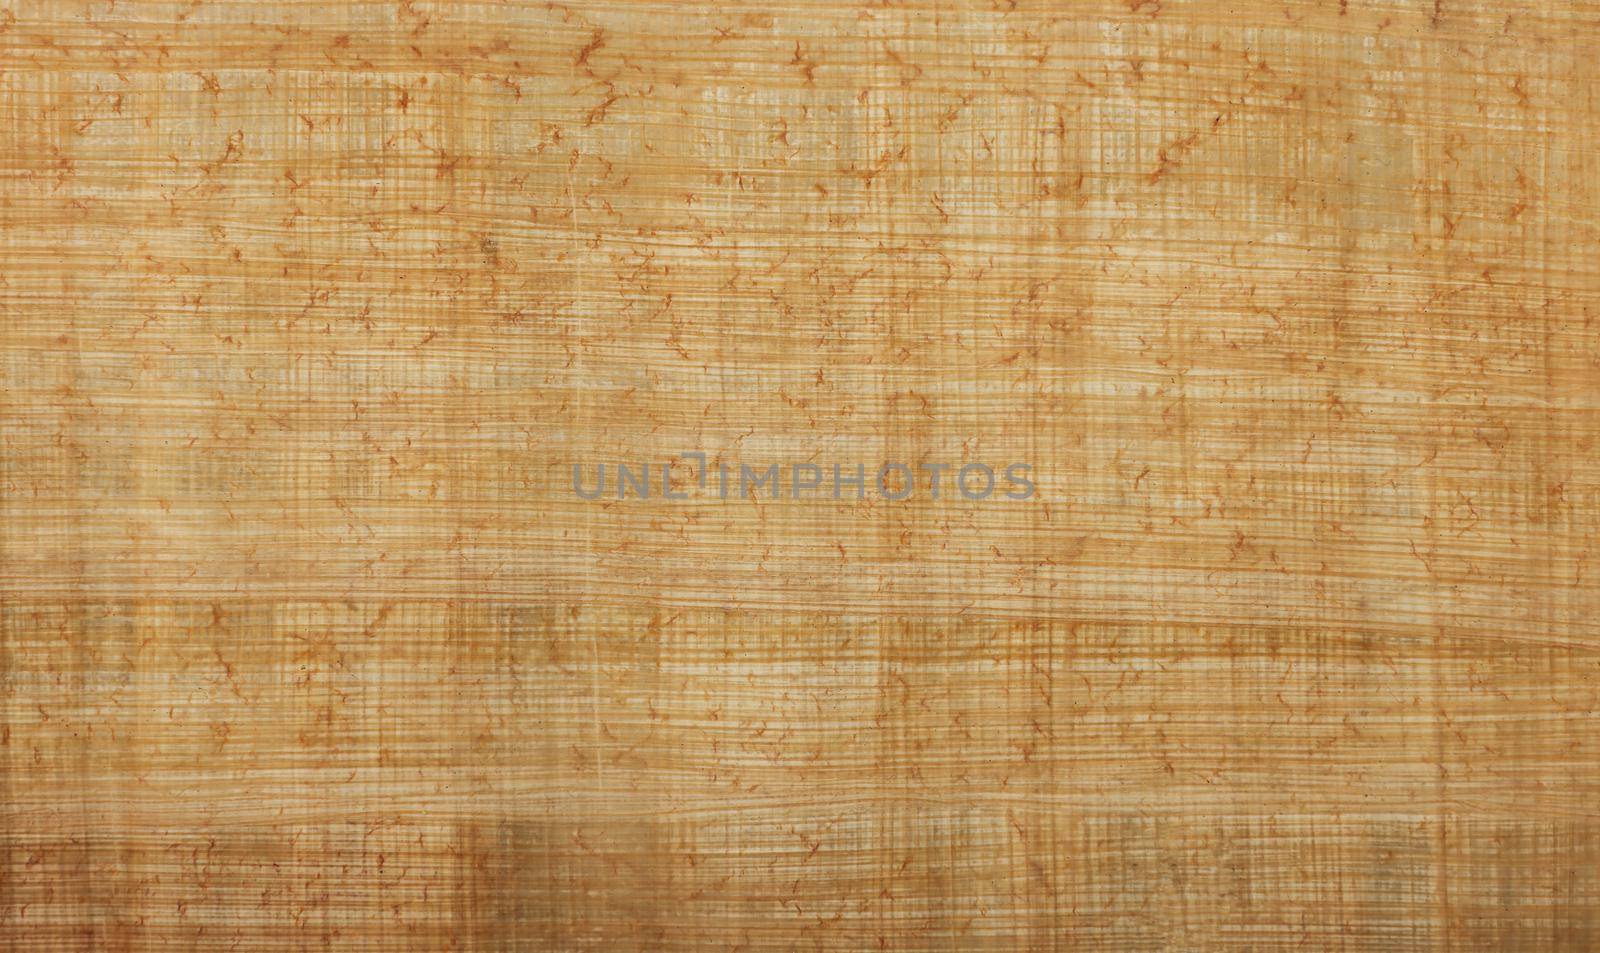 Ancient papyrus paper document background by BreakingTheWalls